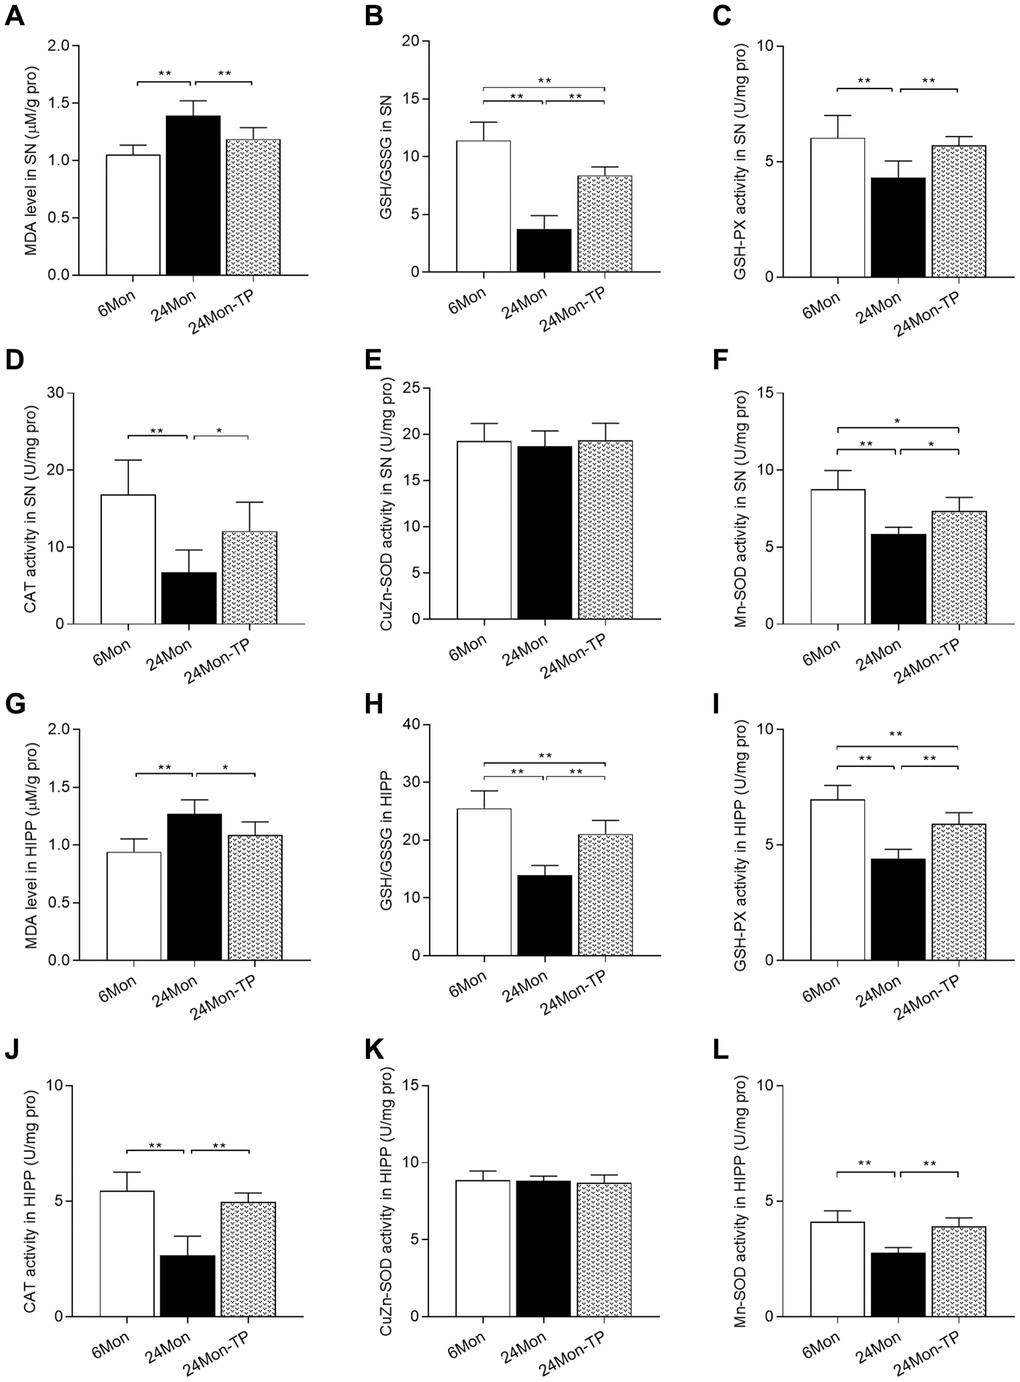 TP supplementation enhances antioxidative potential in the SN and HIPP of aged male rats. (A) MDA levels, (B) GSH/GSSG ratio, (C) GSH-PX activity, (D) CAT activity, (E) CuZn-SOD activity, and (F) Mn-SOD activity in the SN. (G) MDA levels, (H) GSH/GSSG ratio, (I) GSH-PX activity, (J) CAT activity, (K) CuZn-SOD activity, and (L) Mn-SOD activity in the HIPP. Data are expressed as the mean ± S.D. (n = 8/group). *P **P 